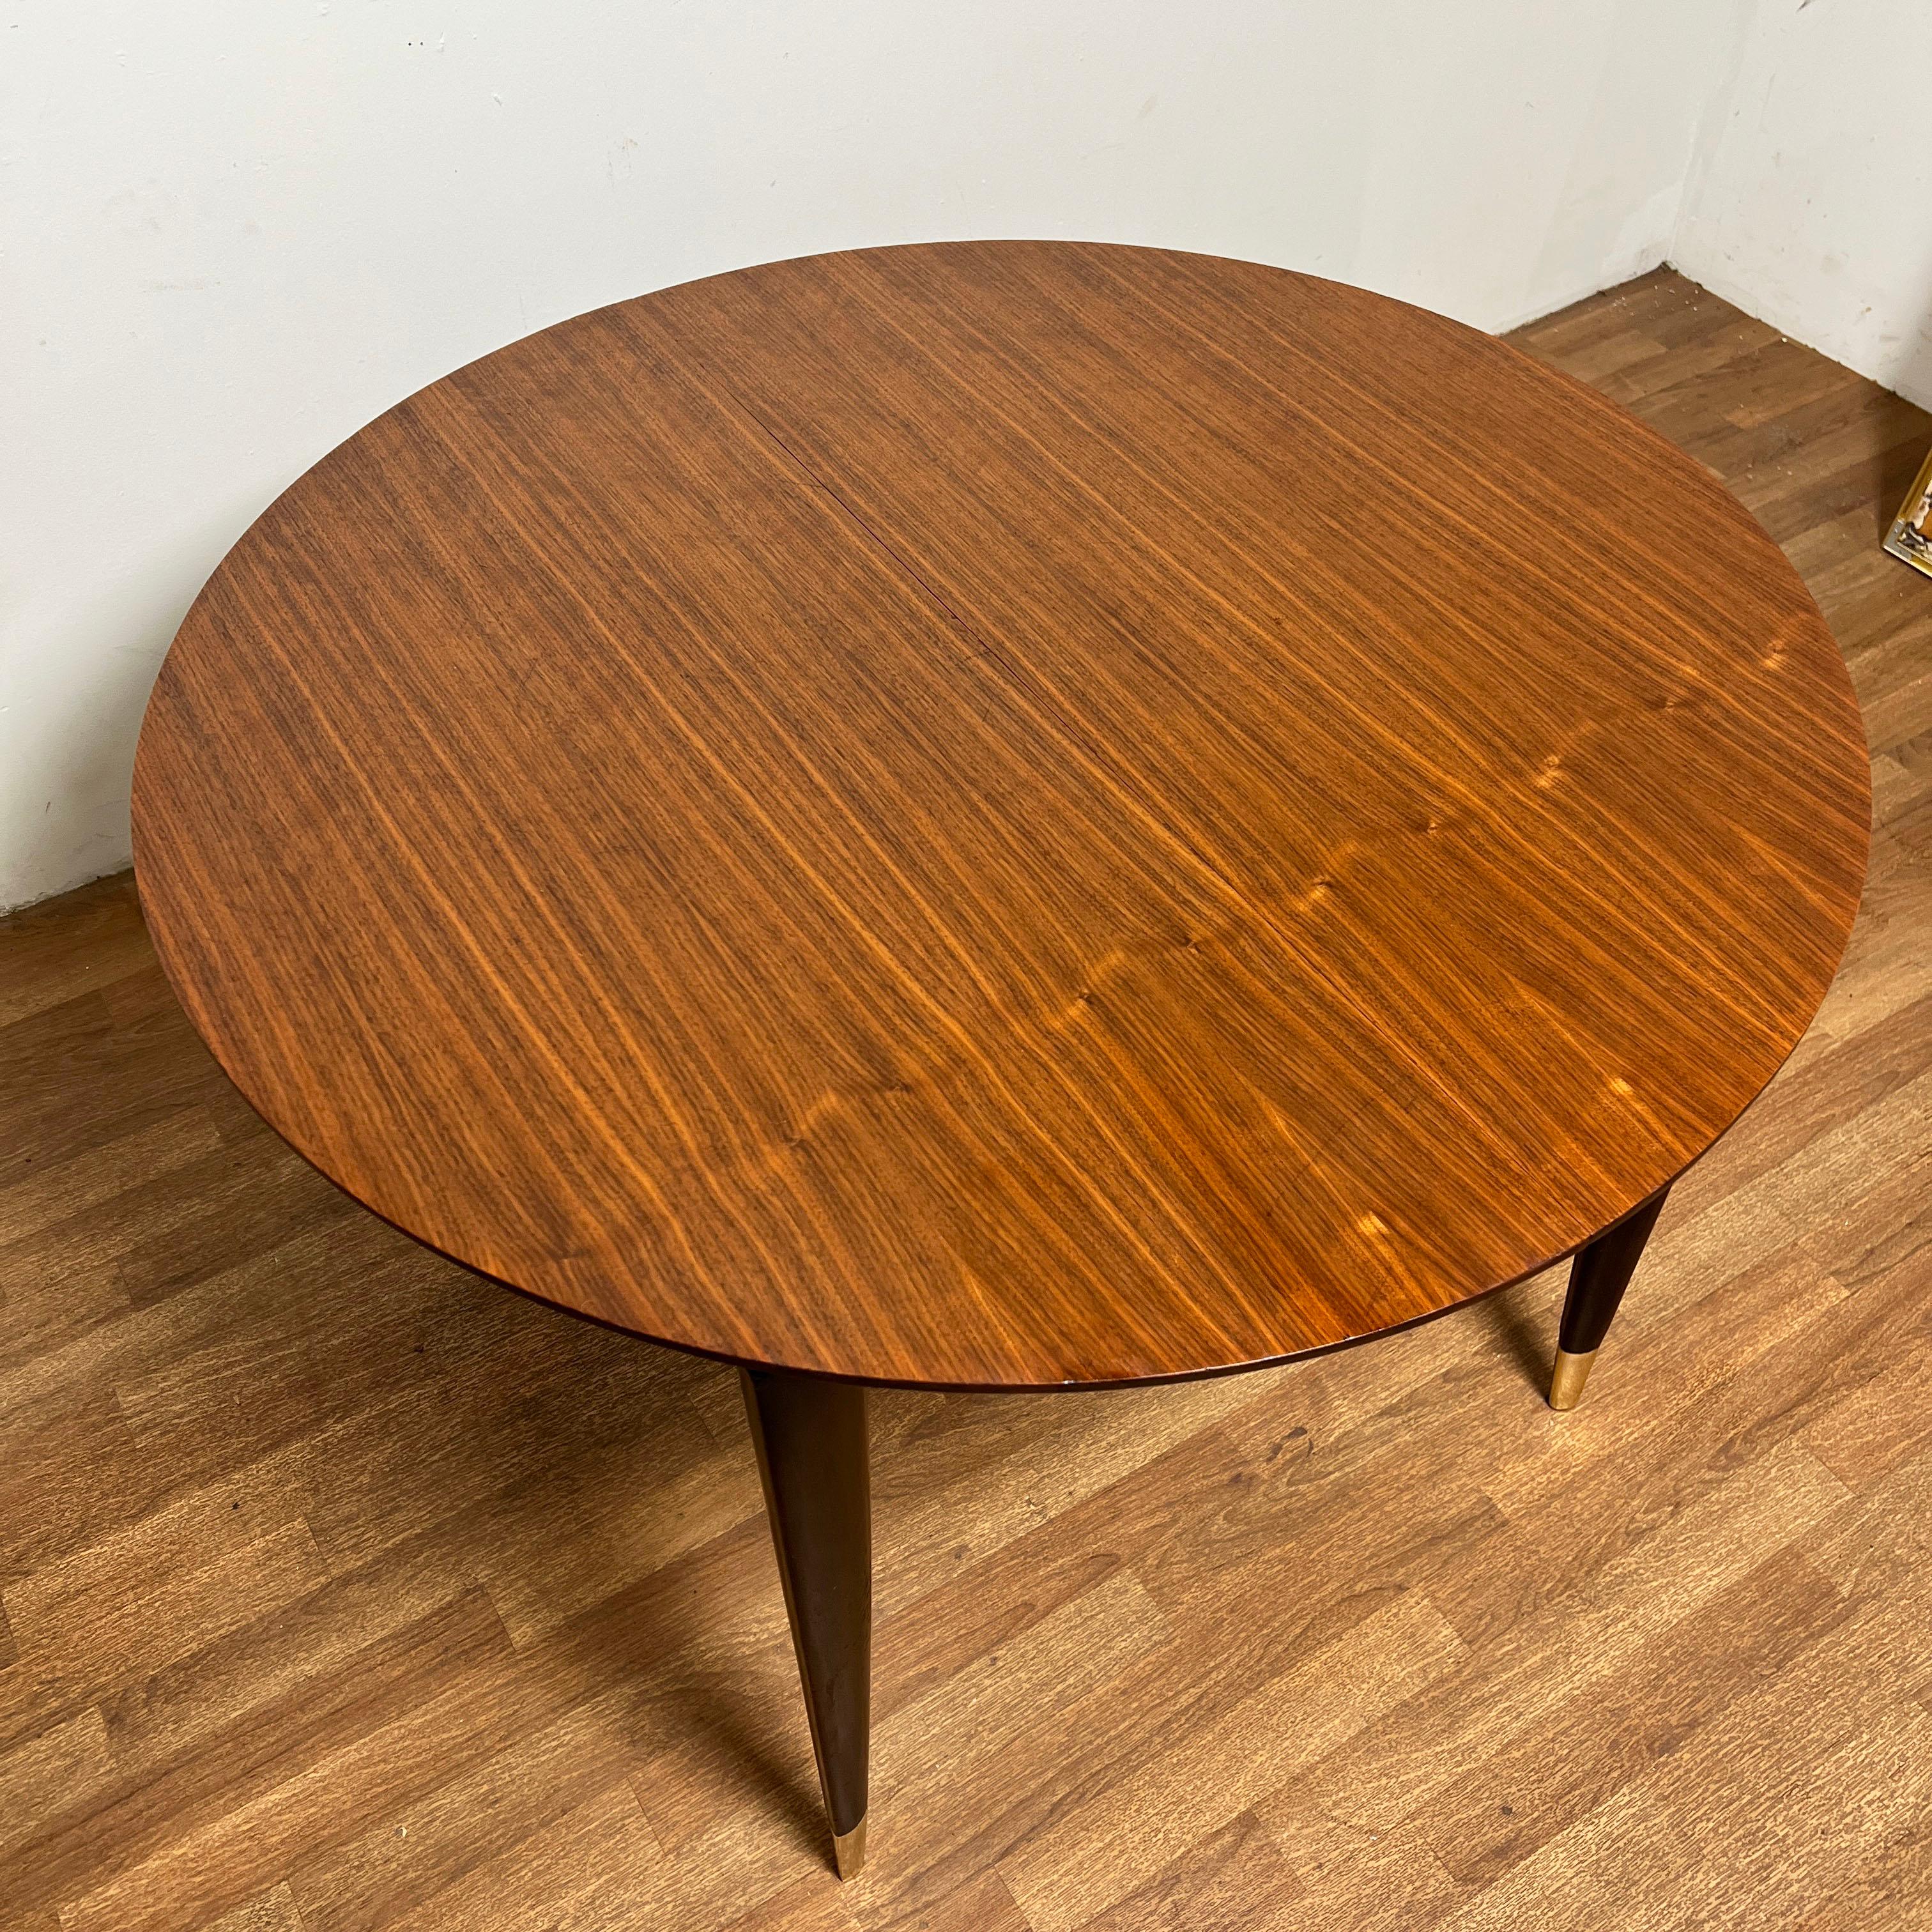 Mid-Century Modern Gio Ponti for Singer Dining Table in Walnut With Brass Sabots Circa 1950s For Sale